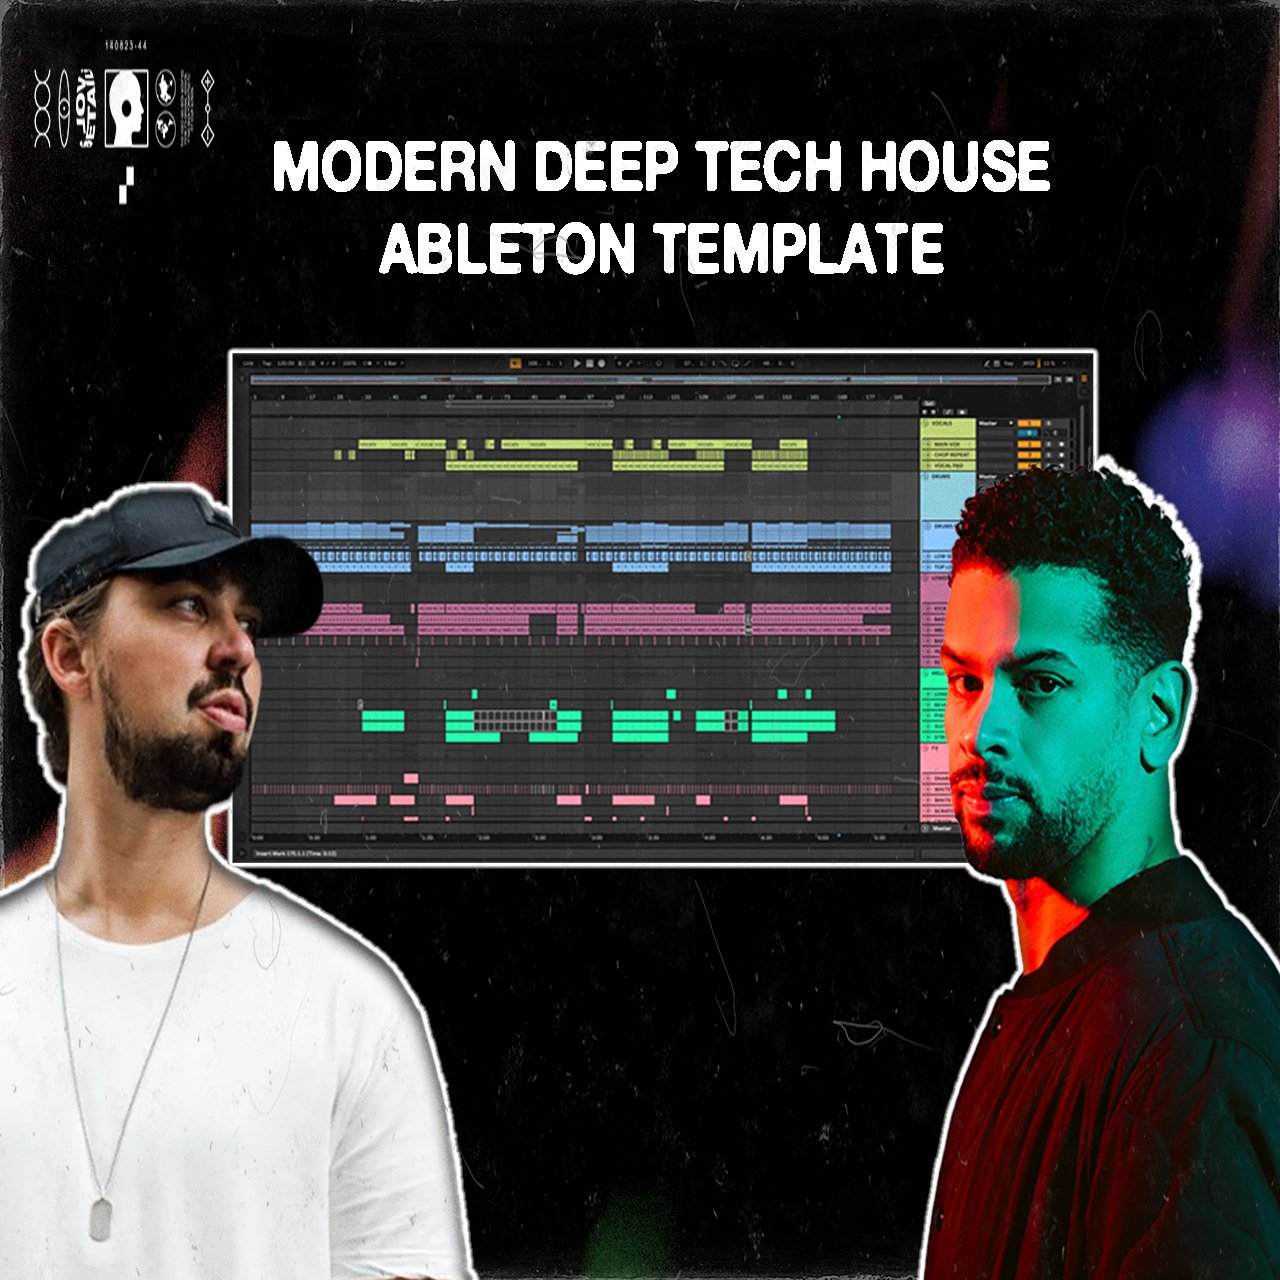 Sonny Foder / MK inspired Ableton Template - project_bass - Tunebat Marketplace